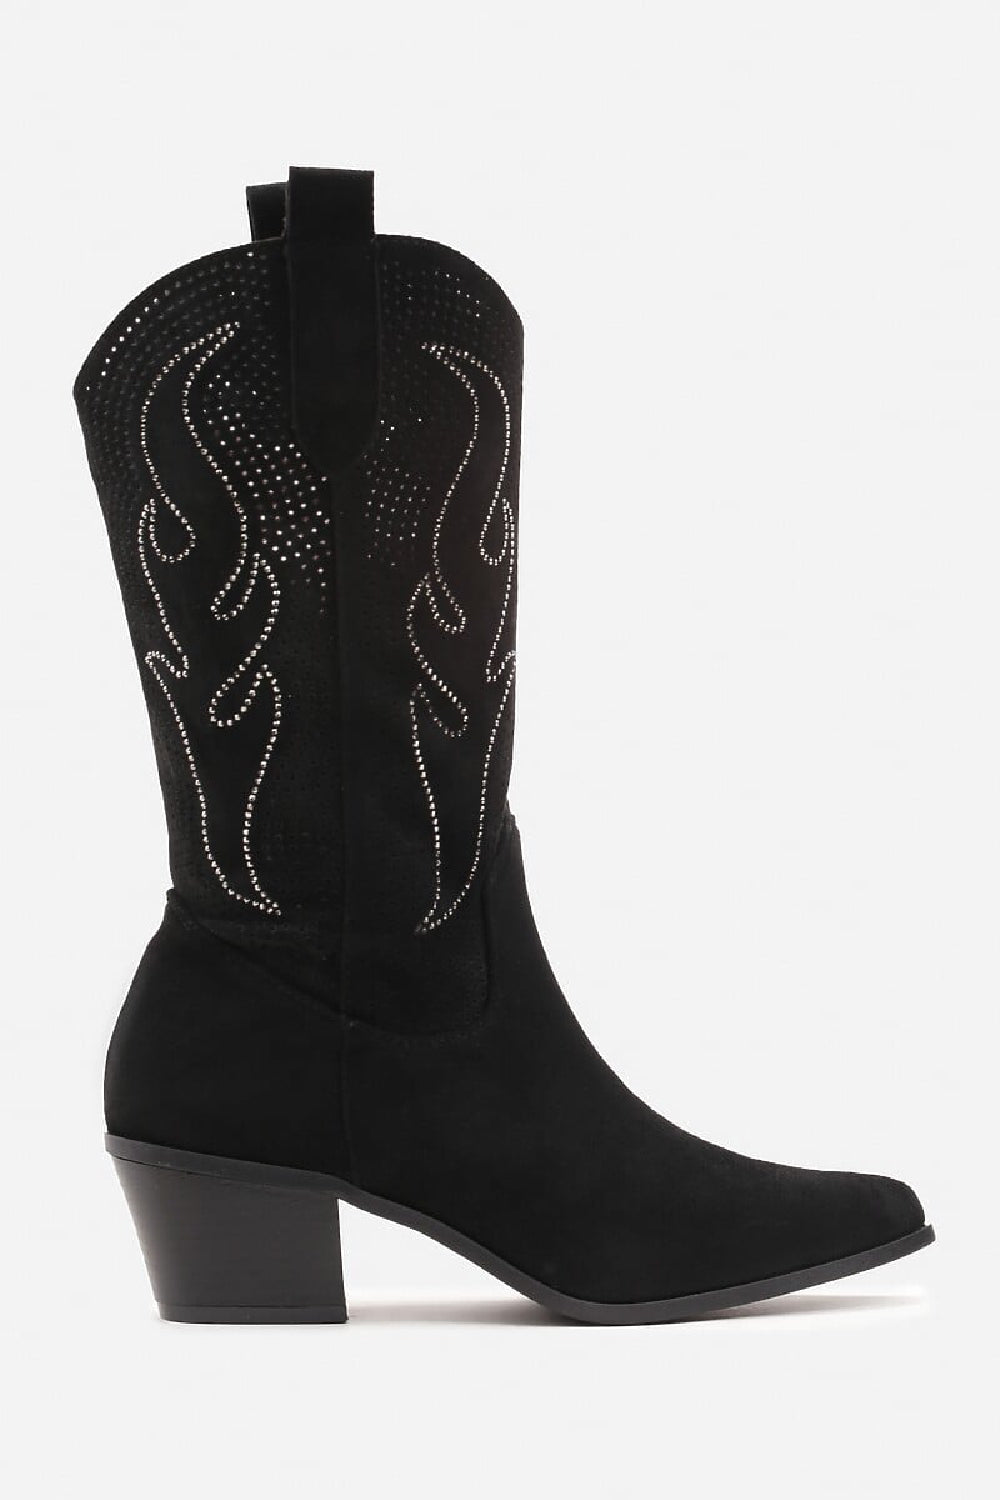 BLACK EMBROIDED CALF HIGH WESTERN COWBOY BOOTS